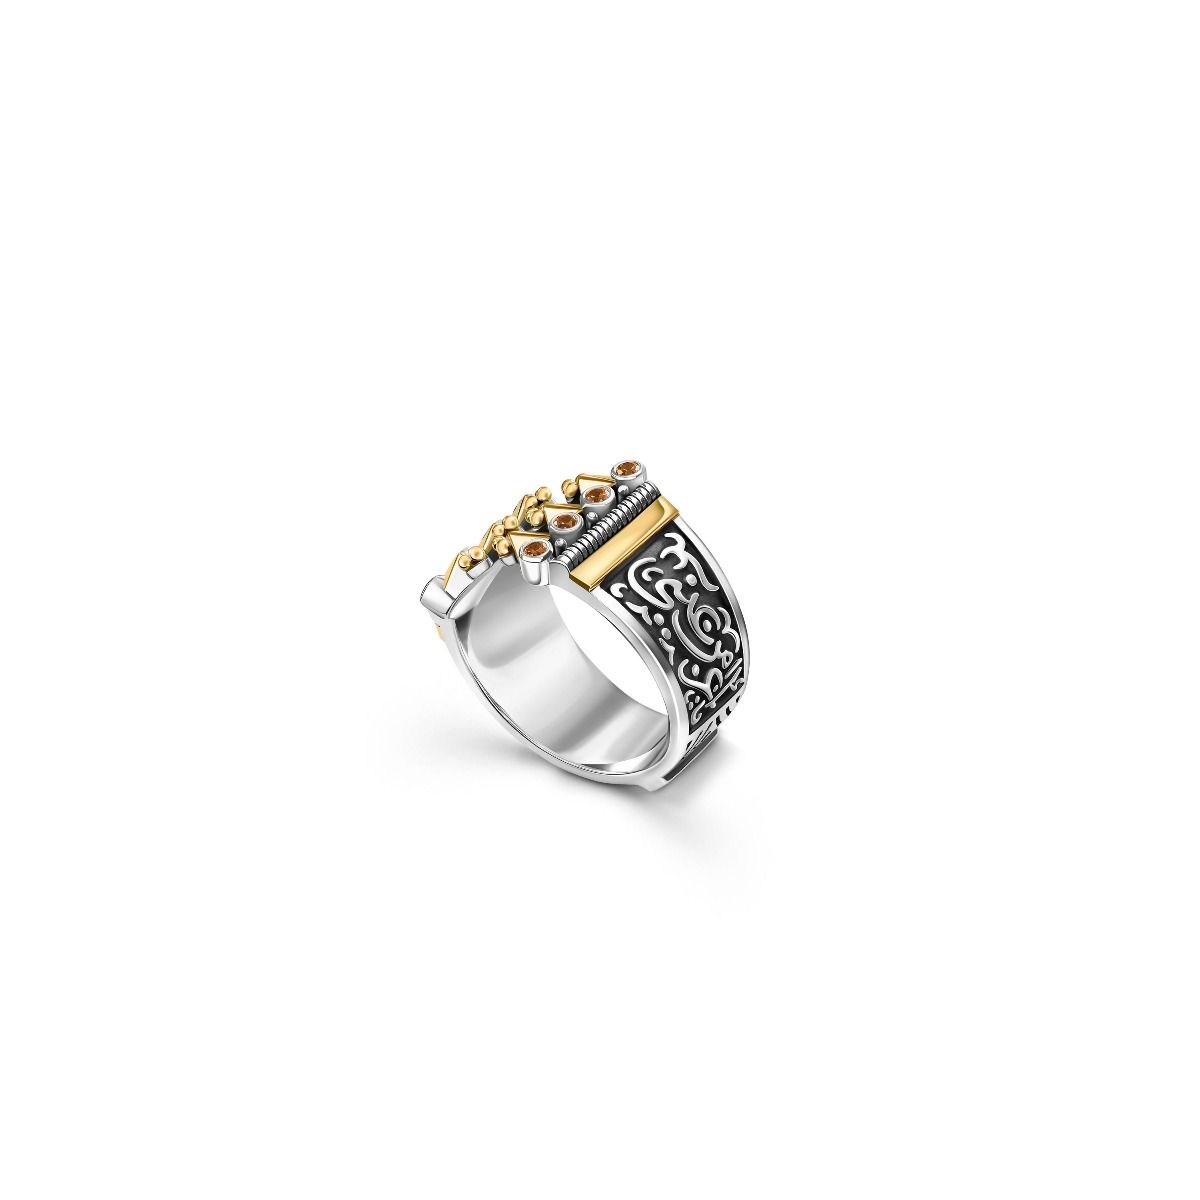 Classic Ring by Azza Fahmy - Designer Rings